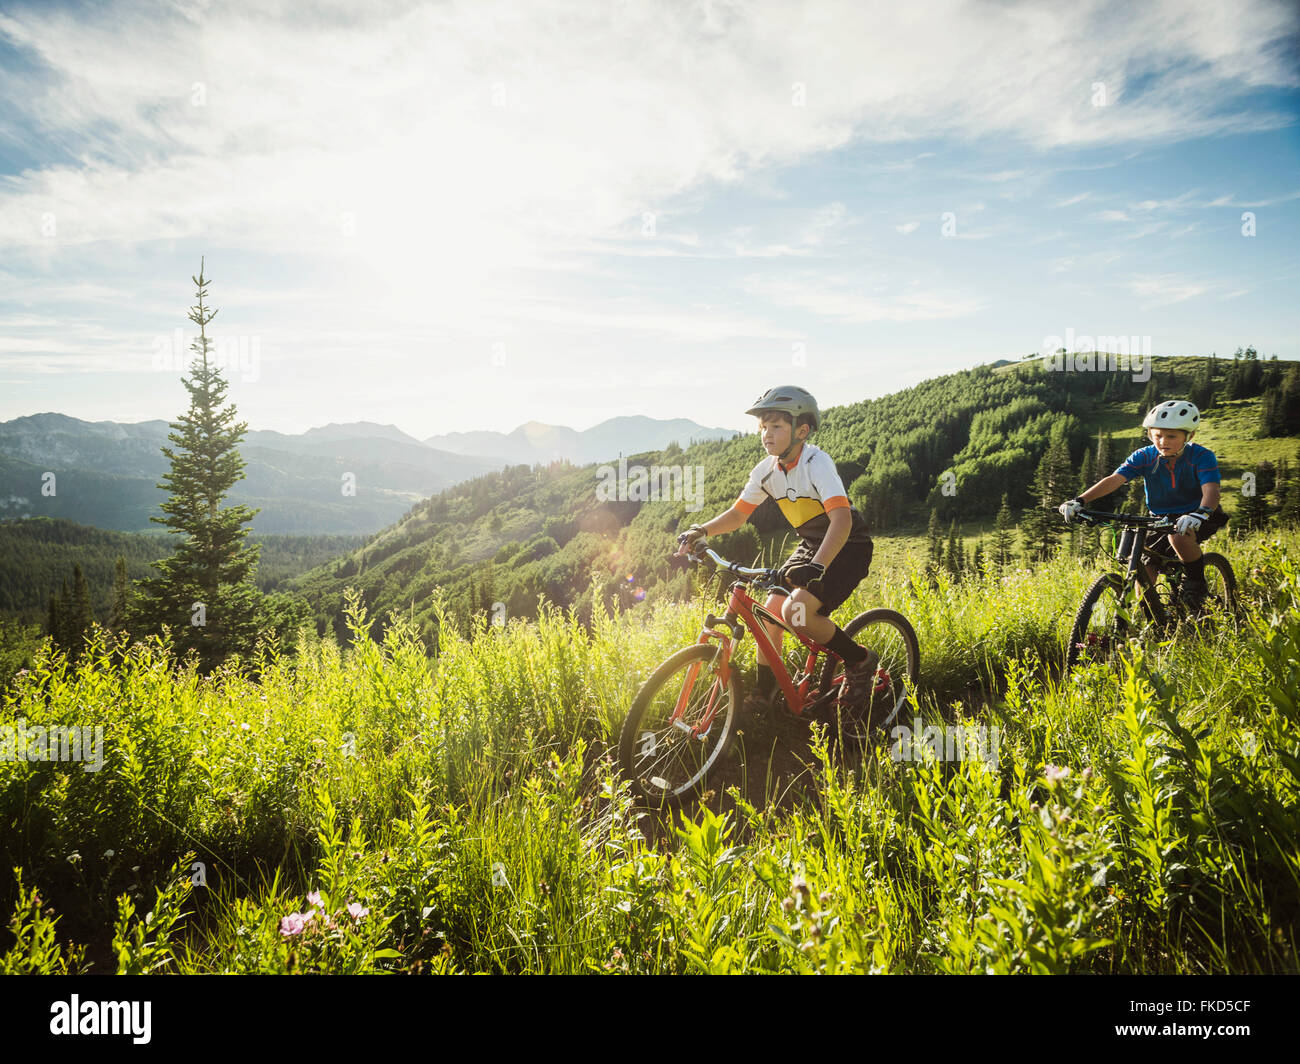 Boys (10-11, 12-13) during bicycle trip in mountain scenery Stock Photo